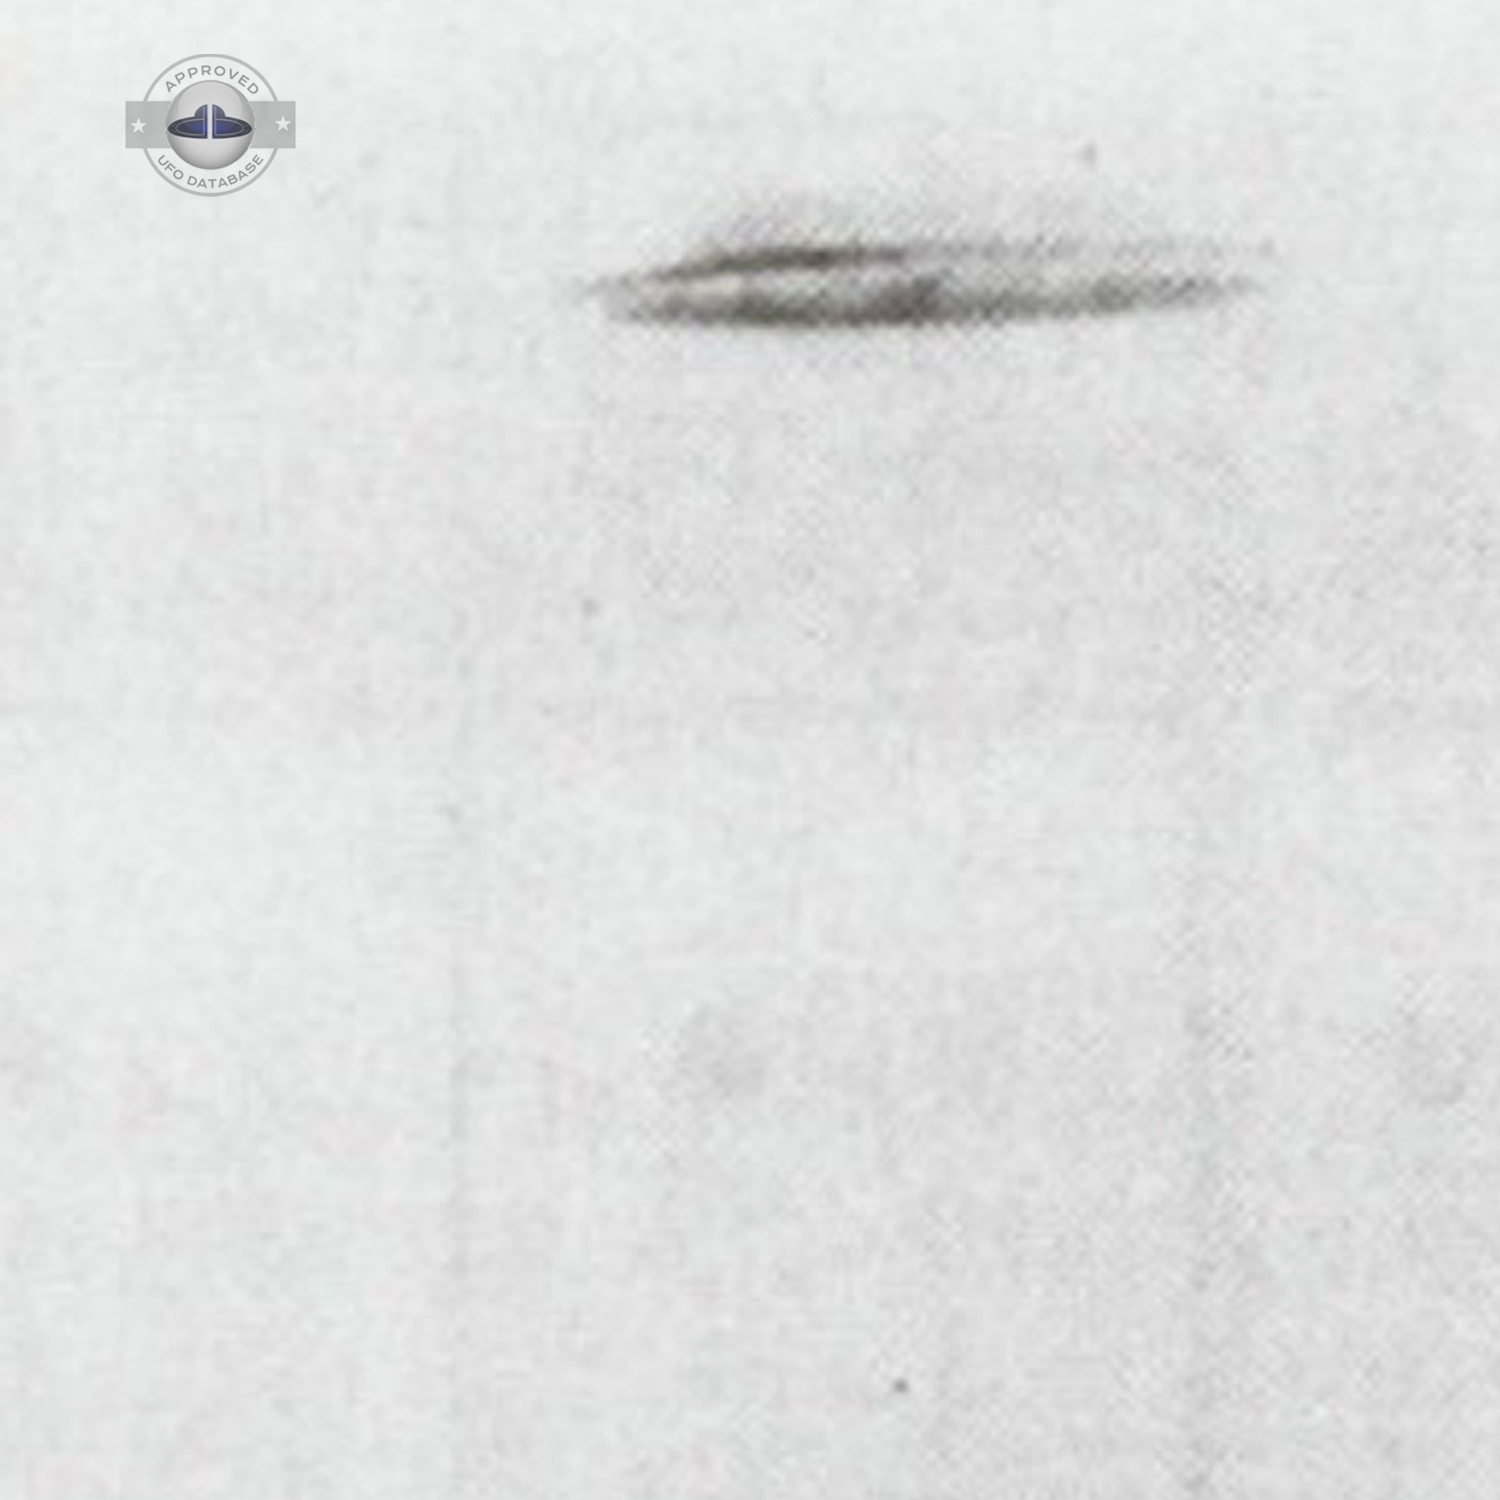 UFO over a fisherman and people in a canoe on a lake UFO Picture #45-3